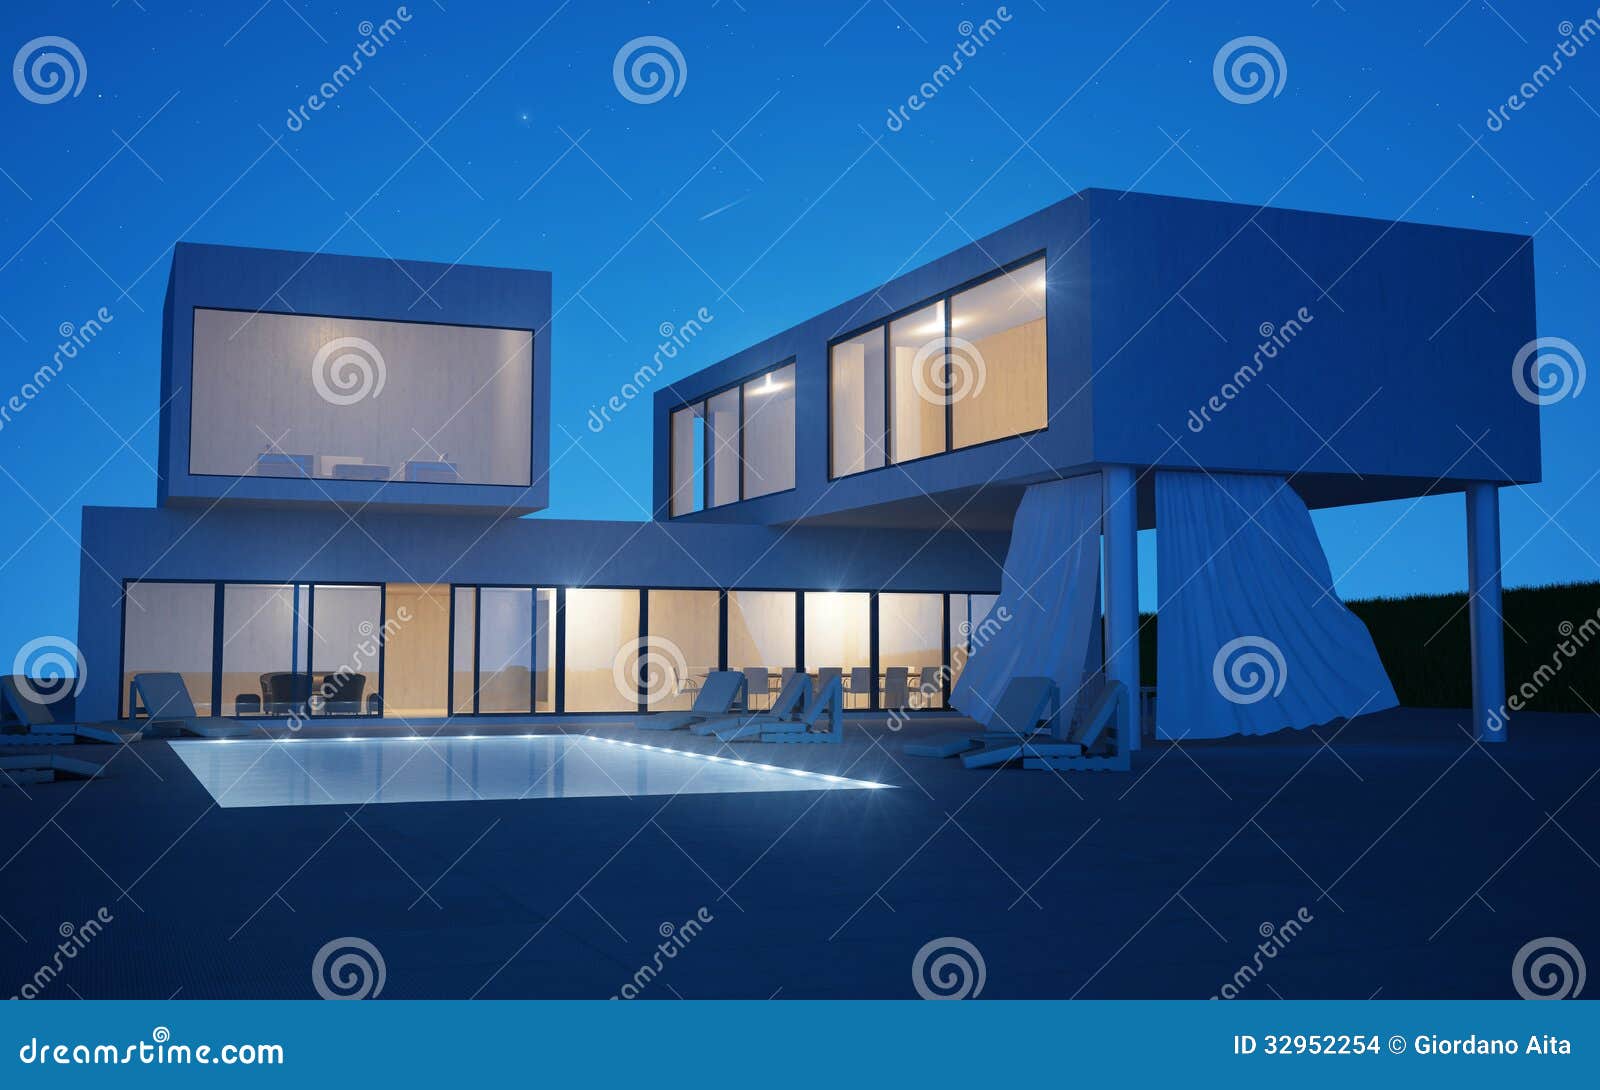 exterior villa with water pool in night time